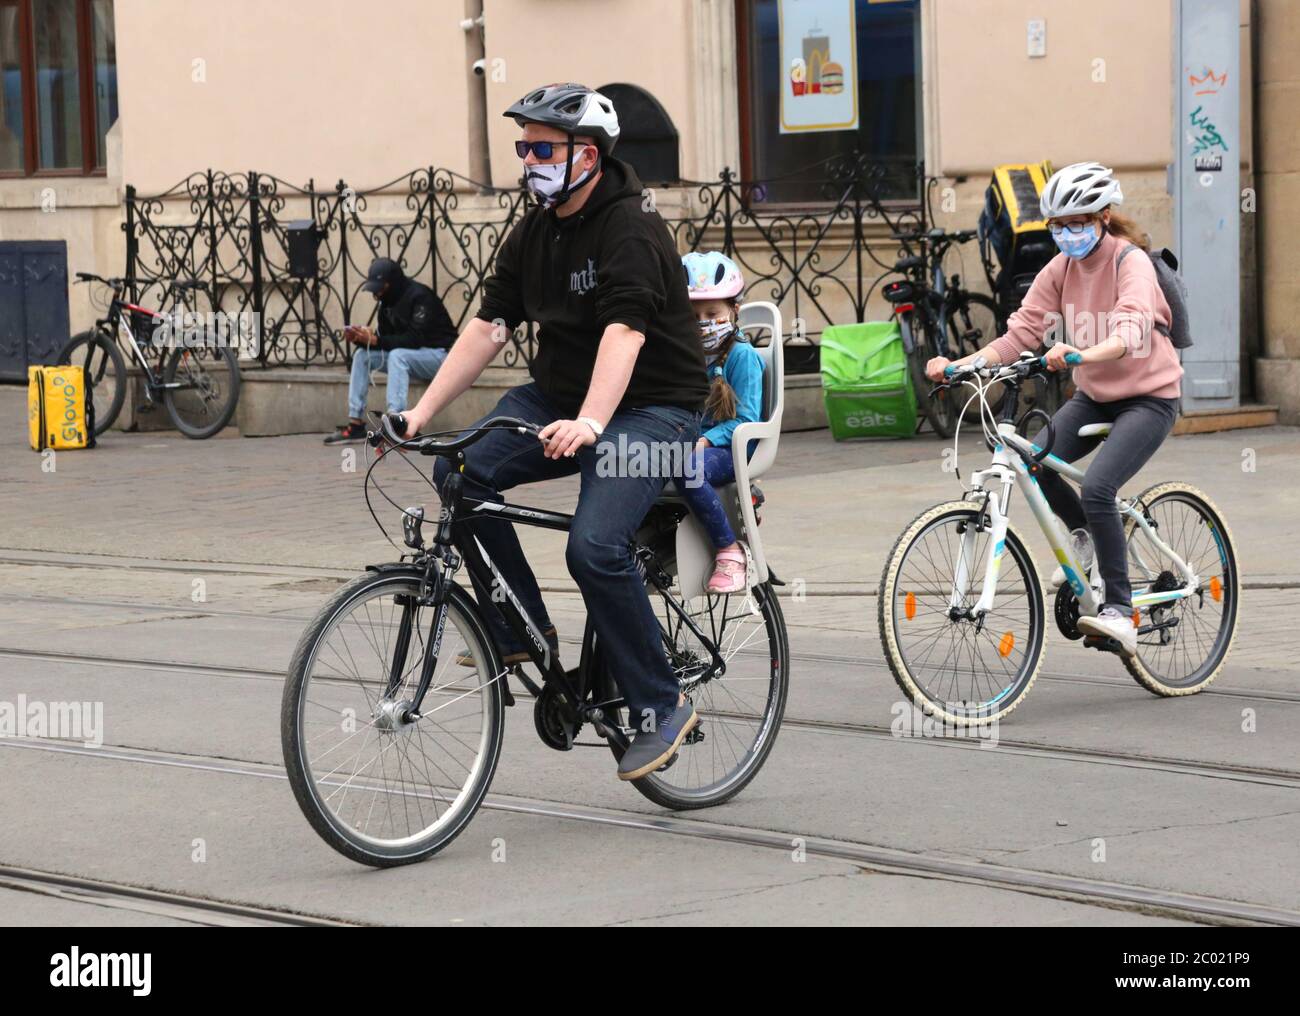 Cracow. Krakow. Poland. Father with two children riding the bikes in masks. Stock Photo